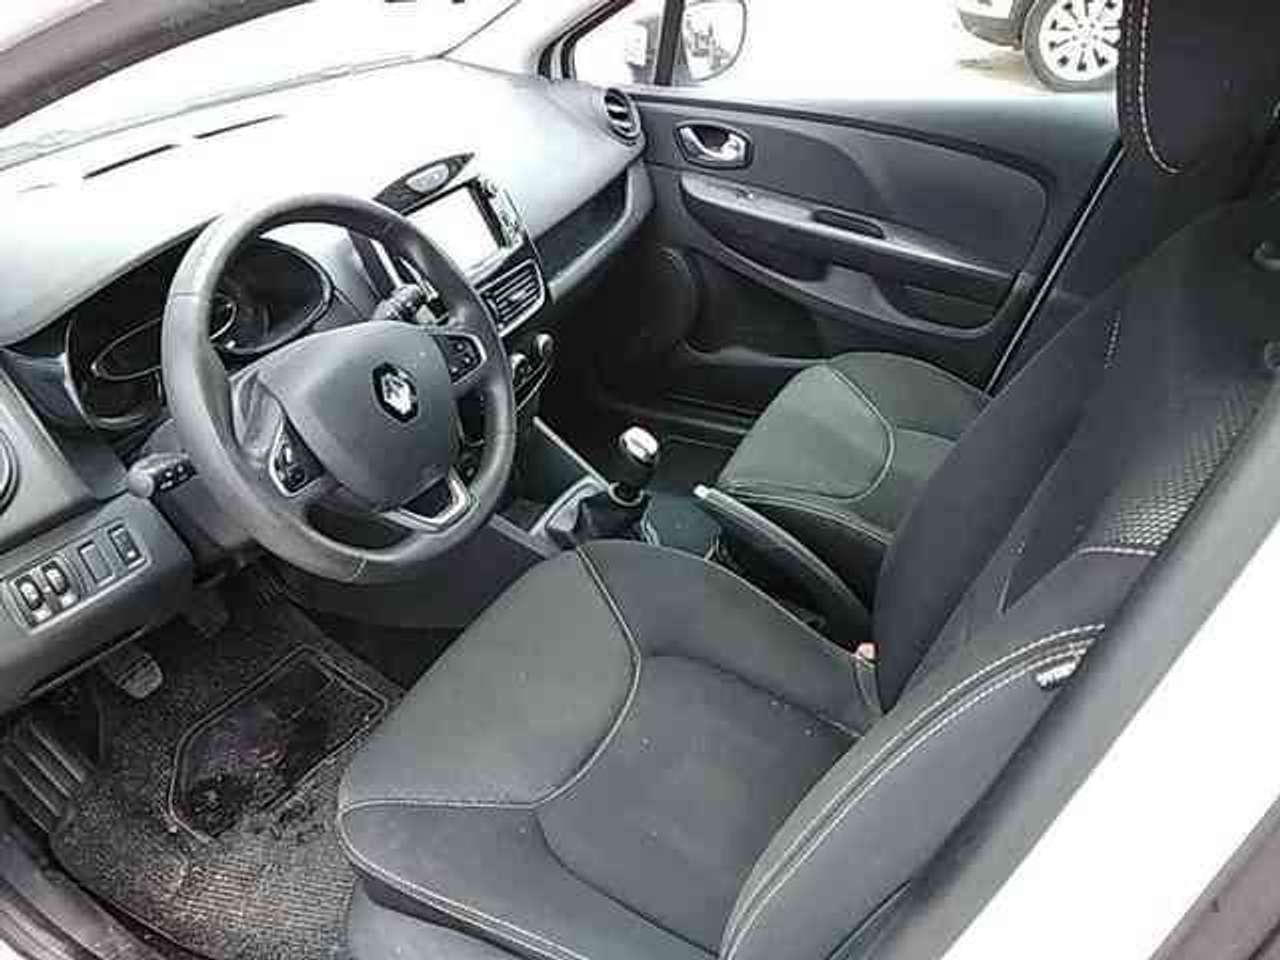 Left hand drive RENAULT CLIO 1.5dCi Energy Business 66kW